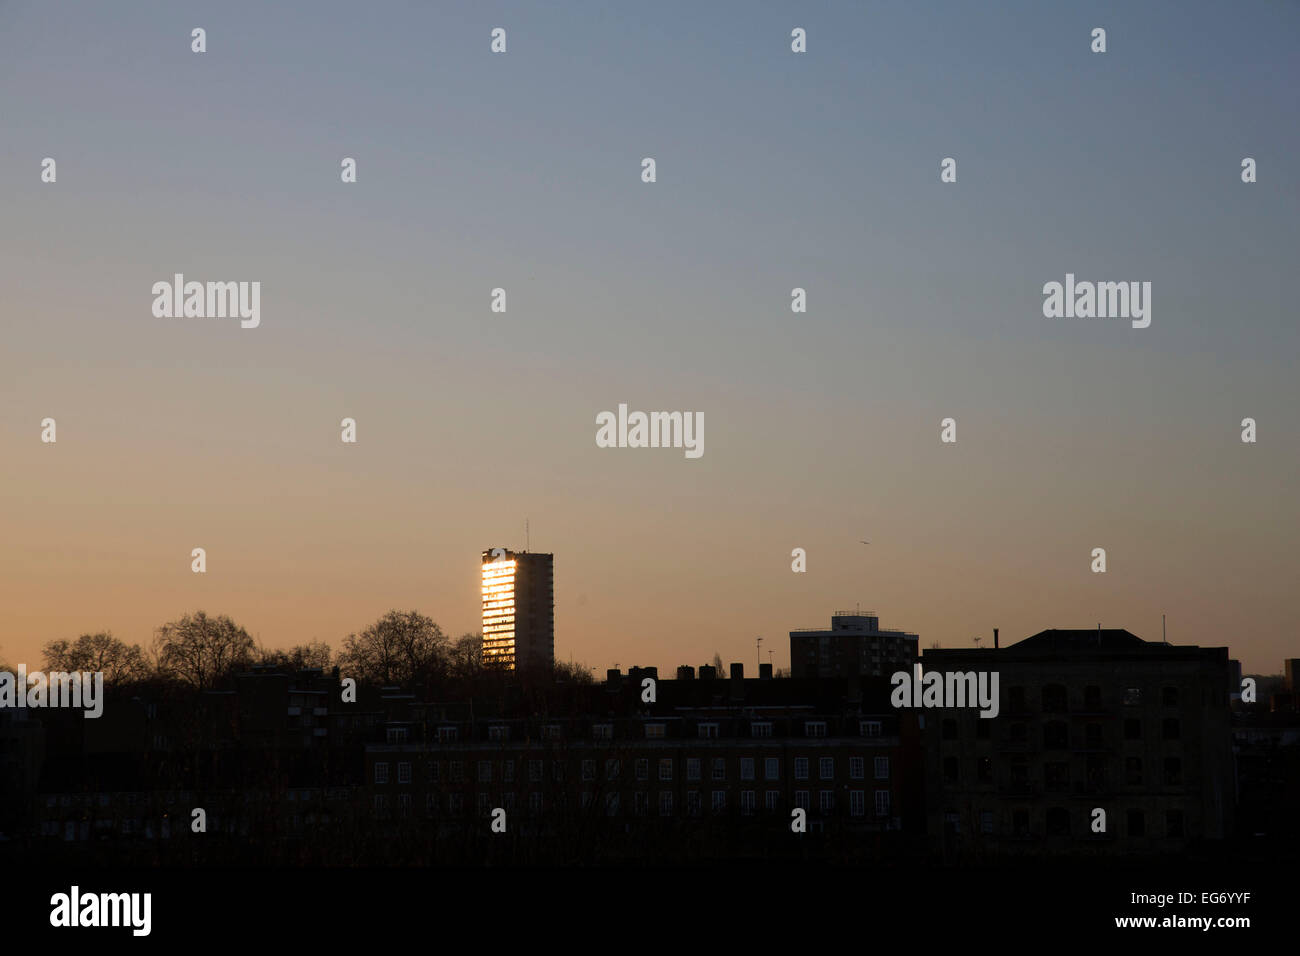 Sunrise reflected in a tower block in South East London, UK. From the same position about two days each year the sun lines up perfectly with this council block and reflects the rising sun directly. Stock Photo